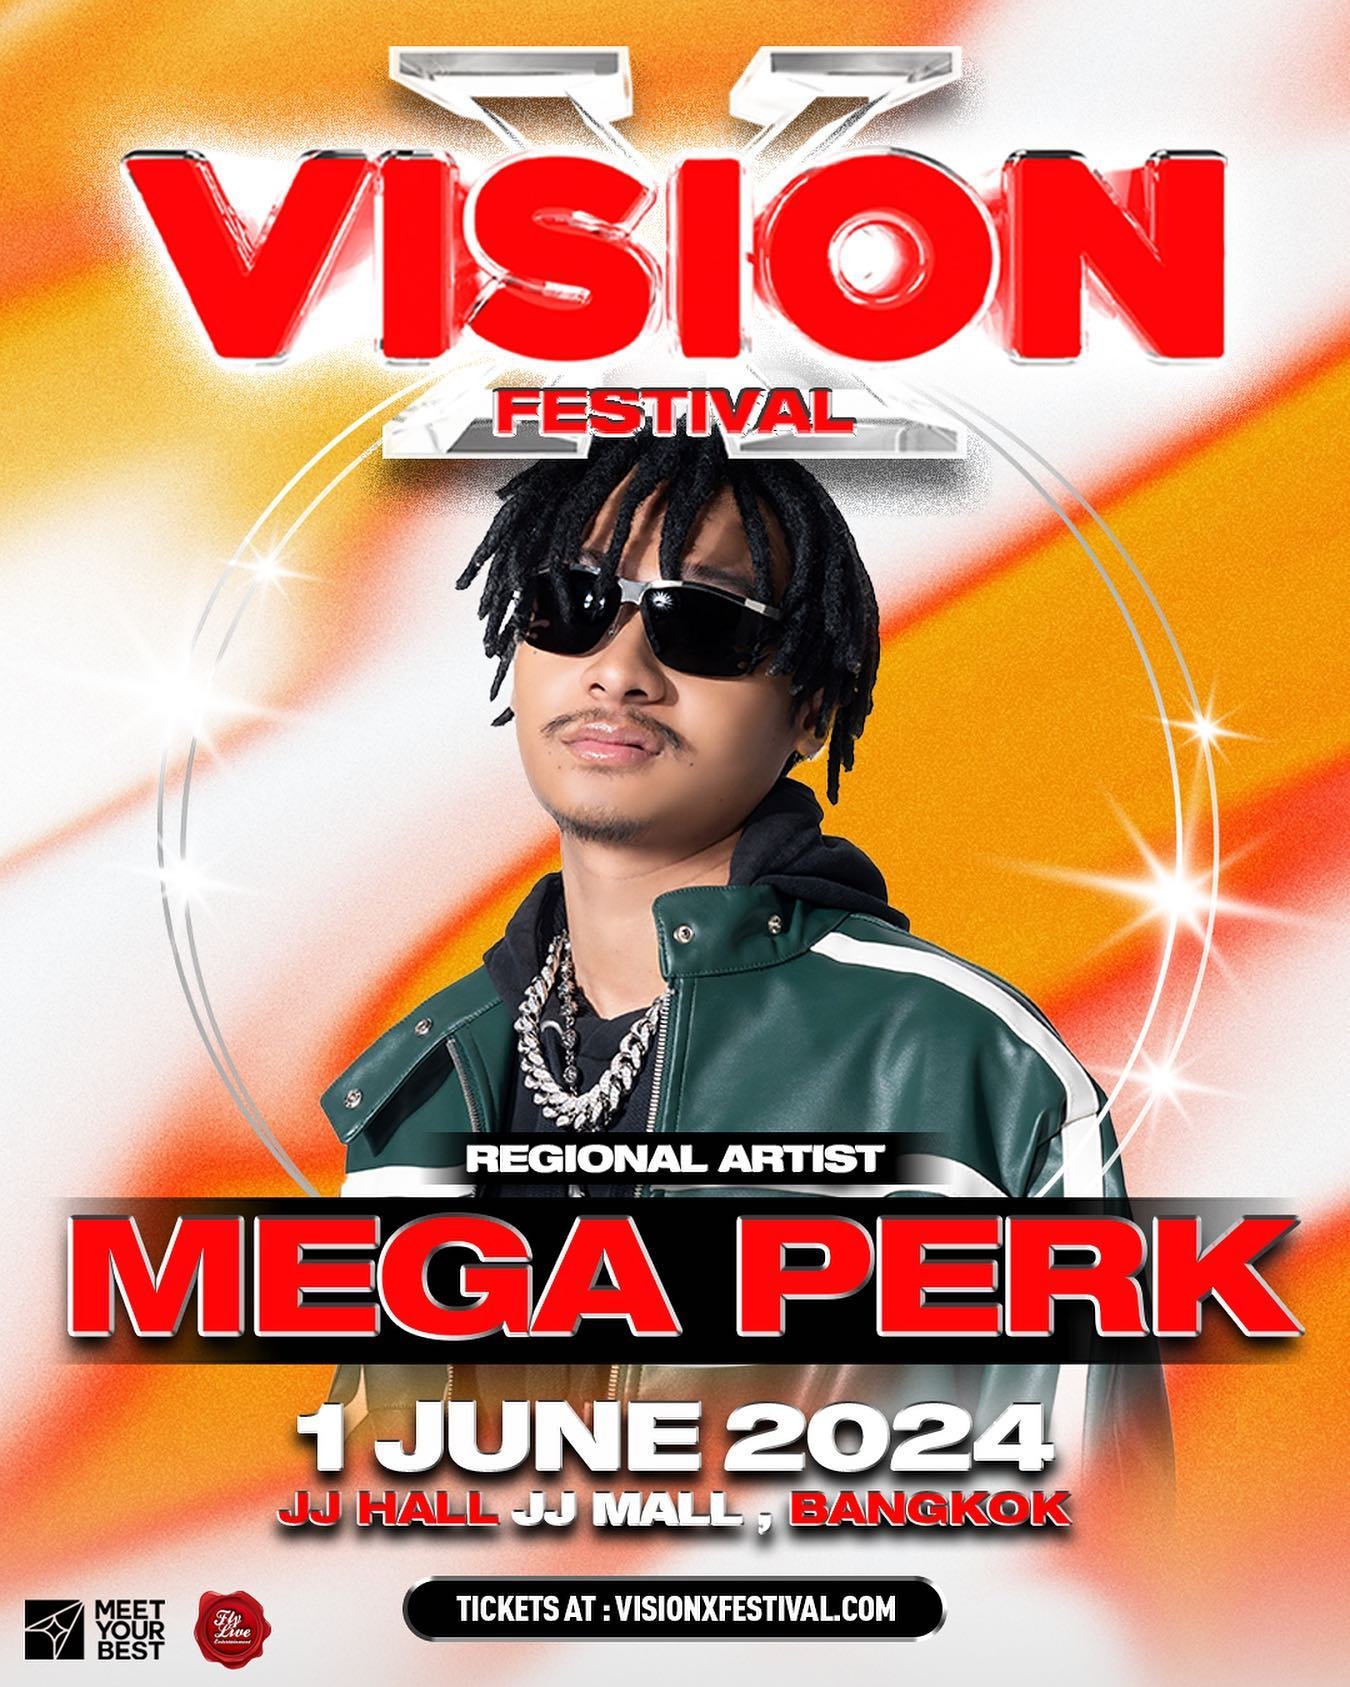 WELCOME OUR 2nd REGIONAL ARTIST 🇹🇭🔥
&lsquo;MEGA PERK&rsquo; FROM HYPE TRAIN 🚂💨

ยินดีต้อนรับศิลปินไทยคนที่สองบนงาน VISION X เฟสติวัล 🇹🇭🔥
&lsquo;MEGA PERK&rsquo; จากค่าย HYPE TRAIN 🚂💨

TIER 2 TICKETS OPEN NOW 👇

Get tickets now 👉🏼 visionx